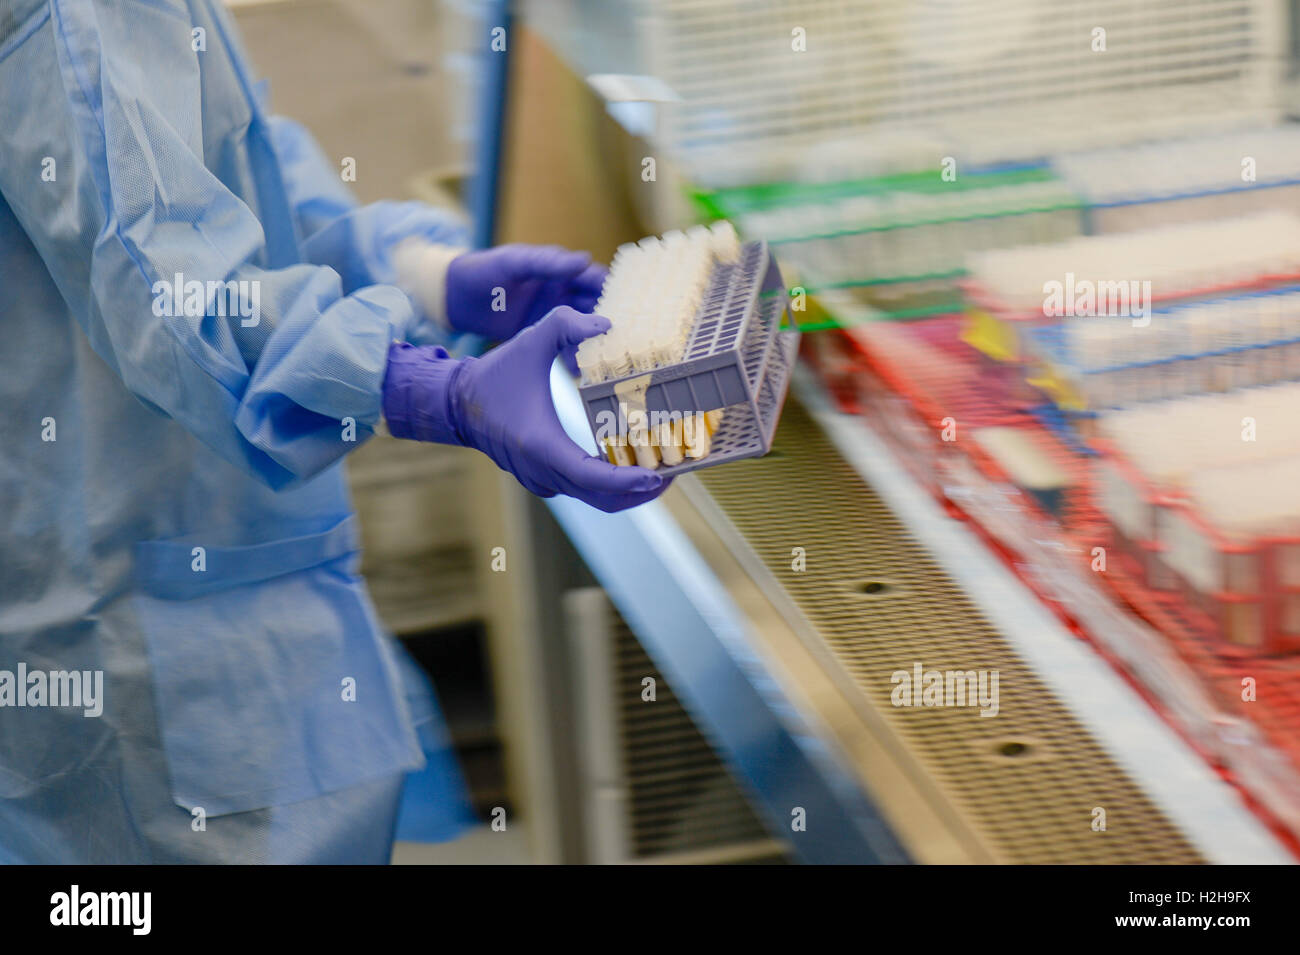 A medical laboratory technician handles human biological samples being tested for the Zika virus at the Epidemiology Lab at the Wright-Patterson Air Force Base April 20, 2016 in Dayton, Ohio. Stock Photo